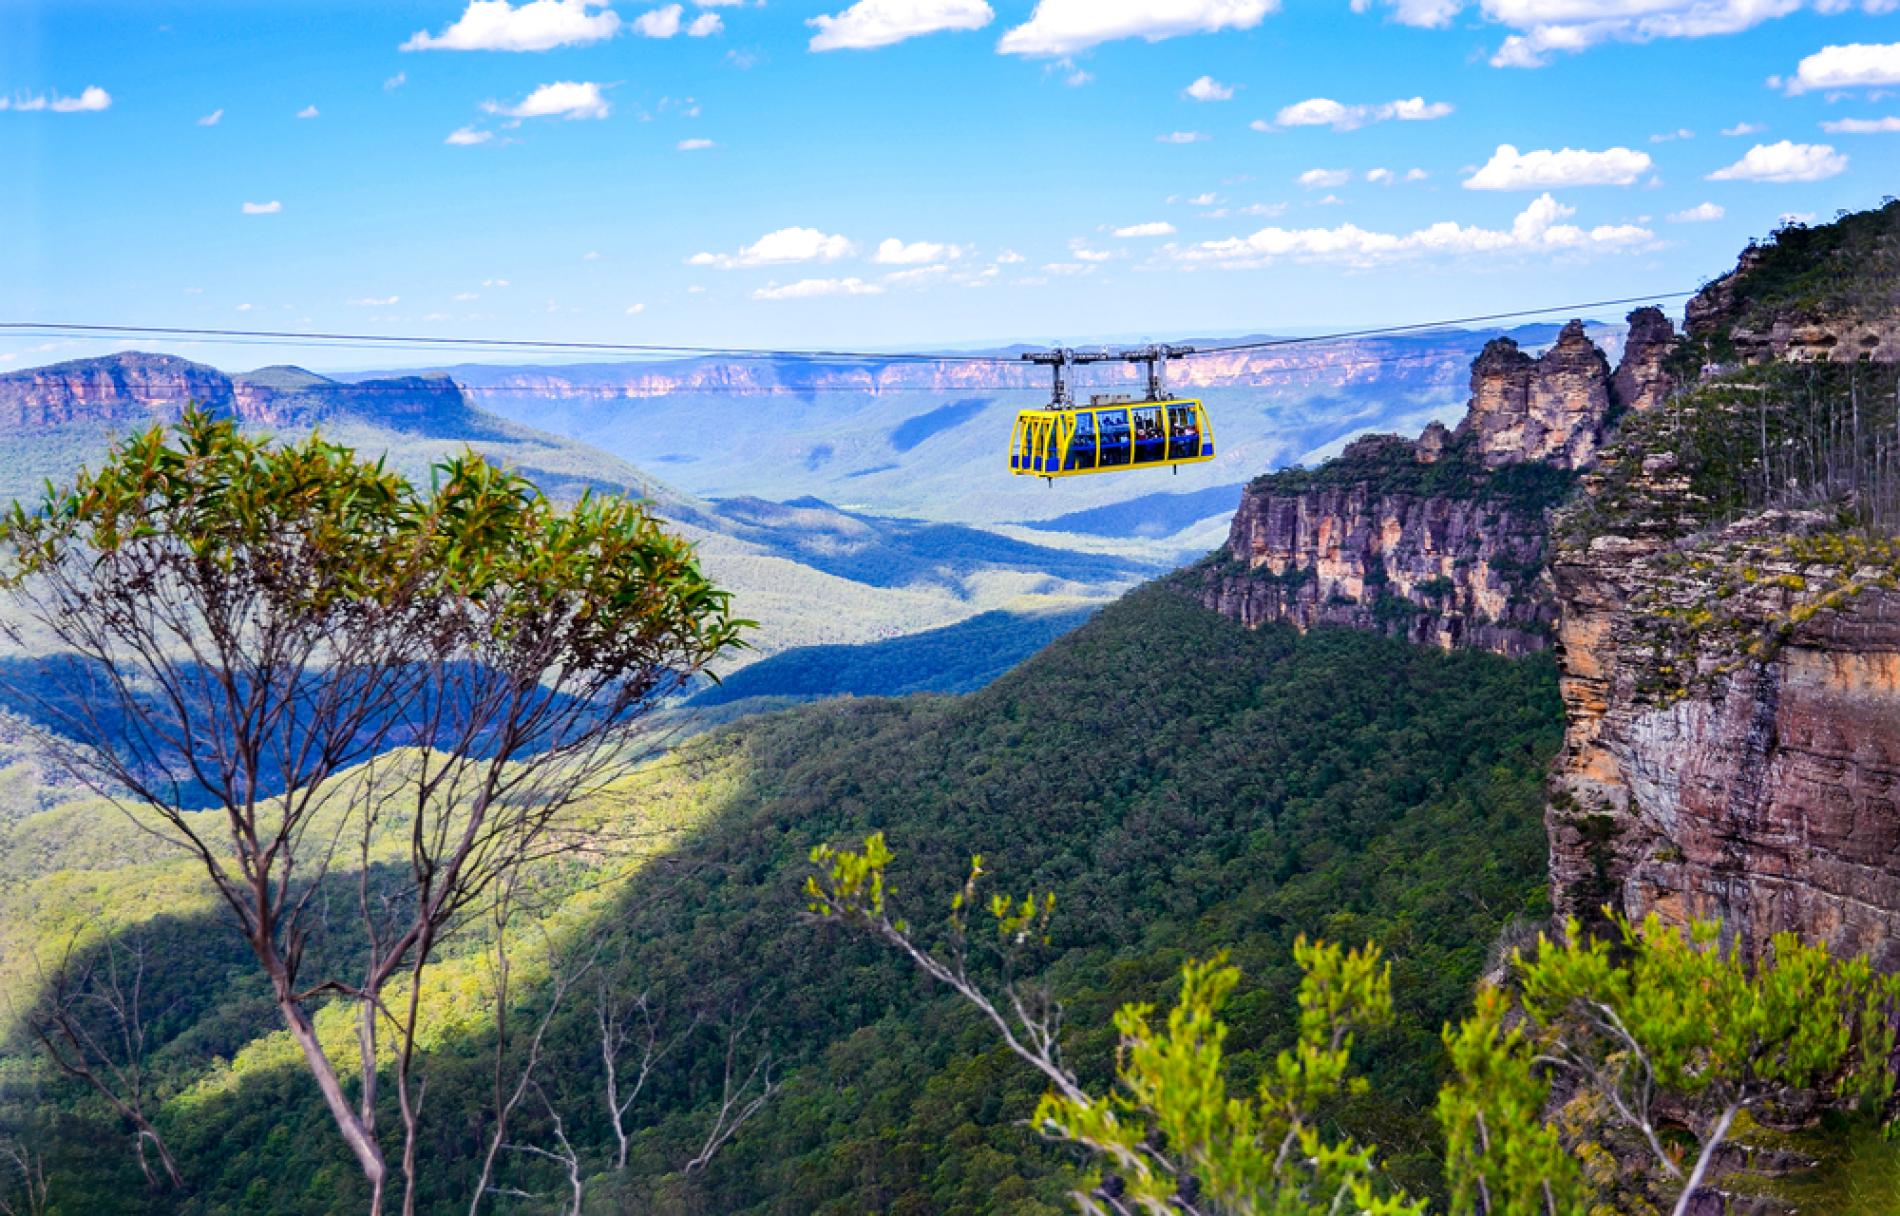 What to see in the Blue Mountains of Sydney